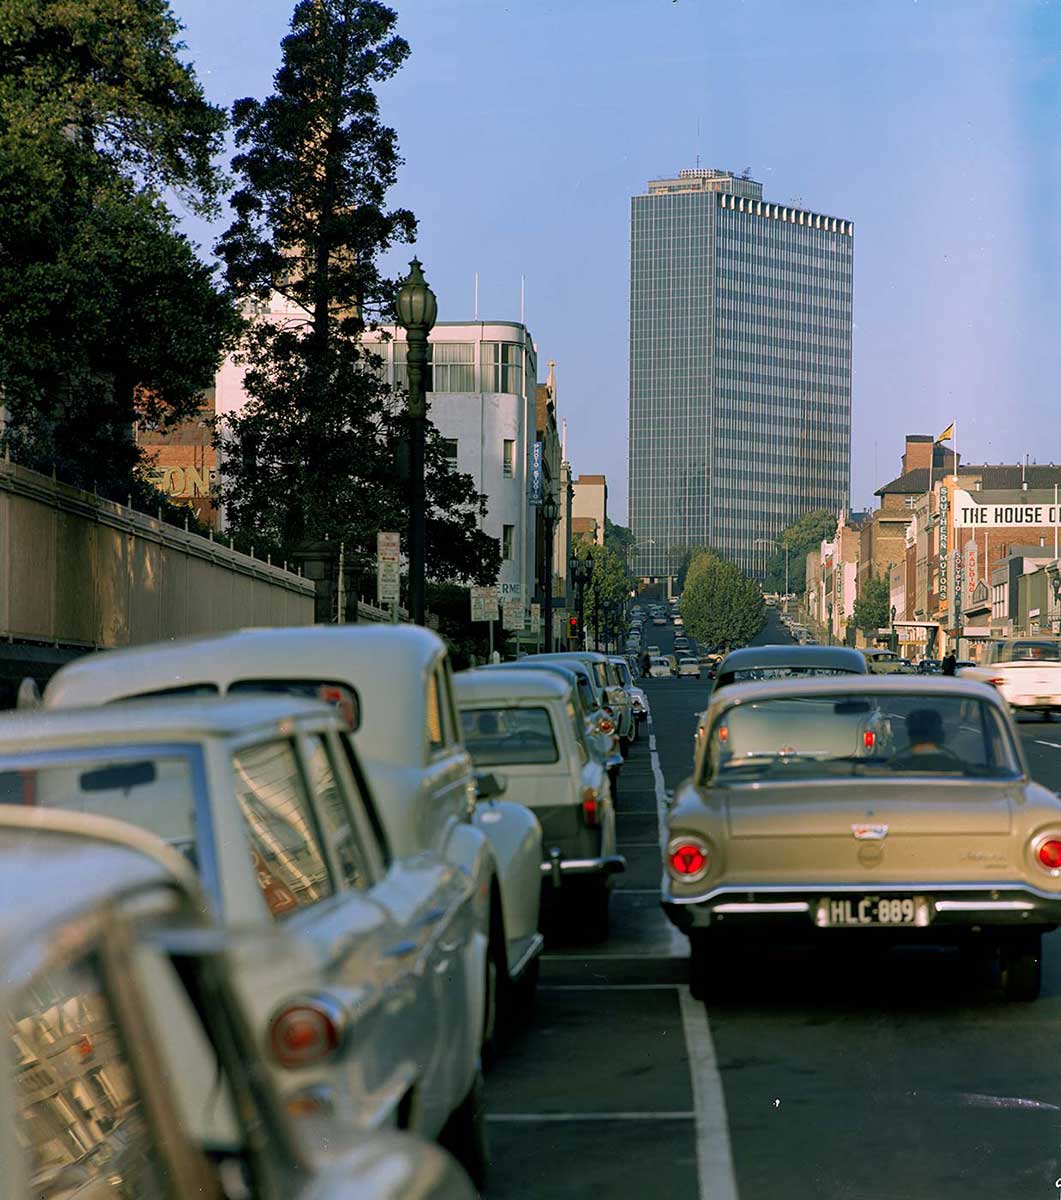 Photo depicting cars from the 1960s on a city road. There is a view of a tall building in the distance. - click to view larger image